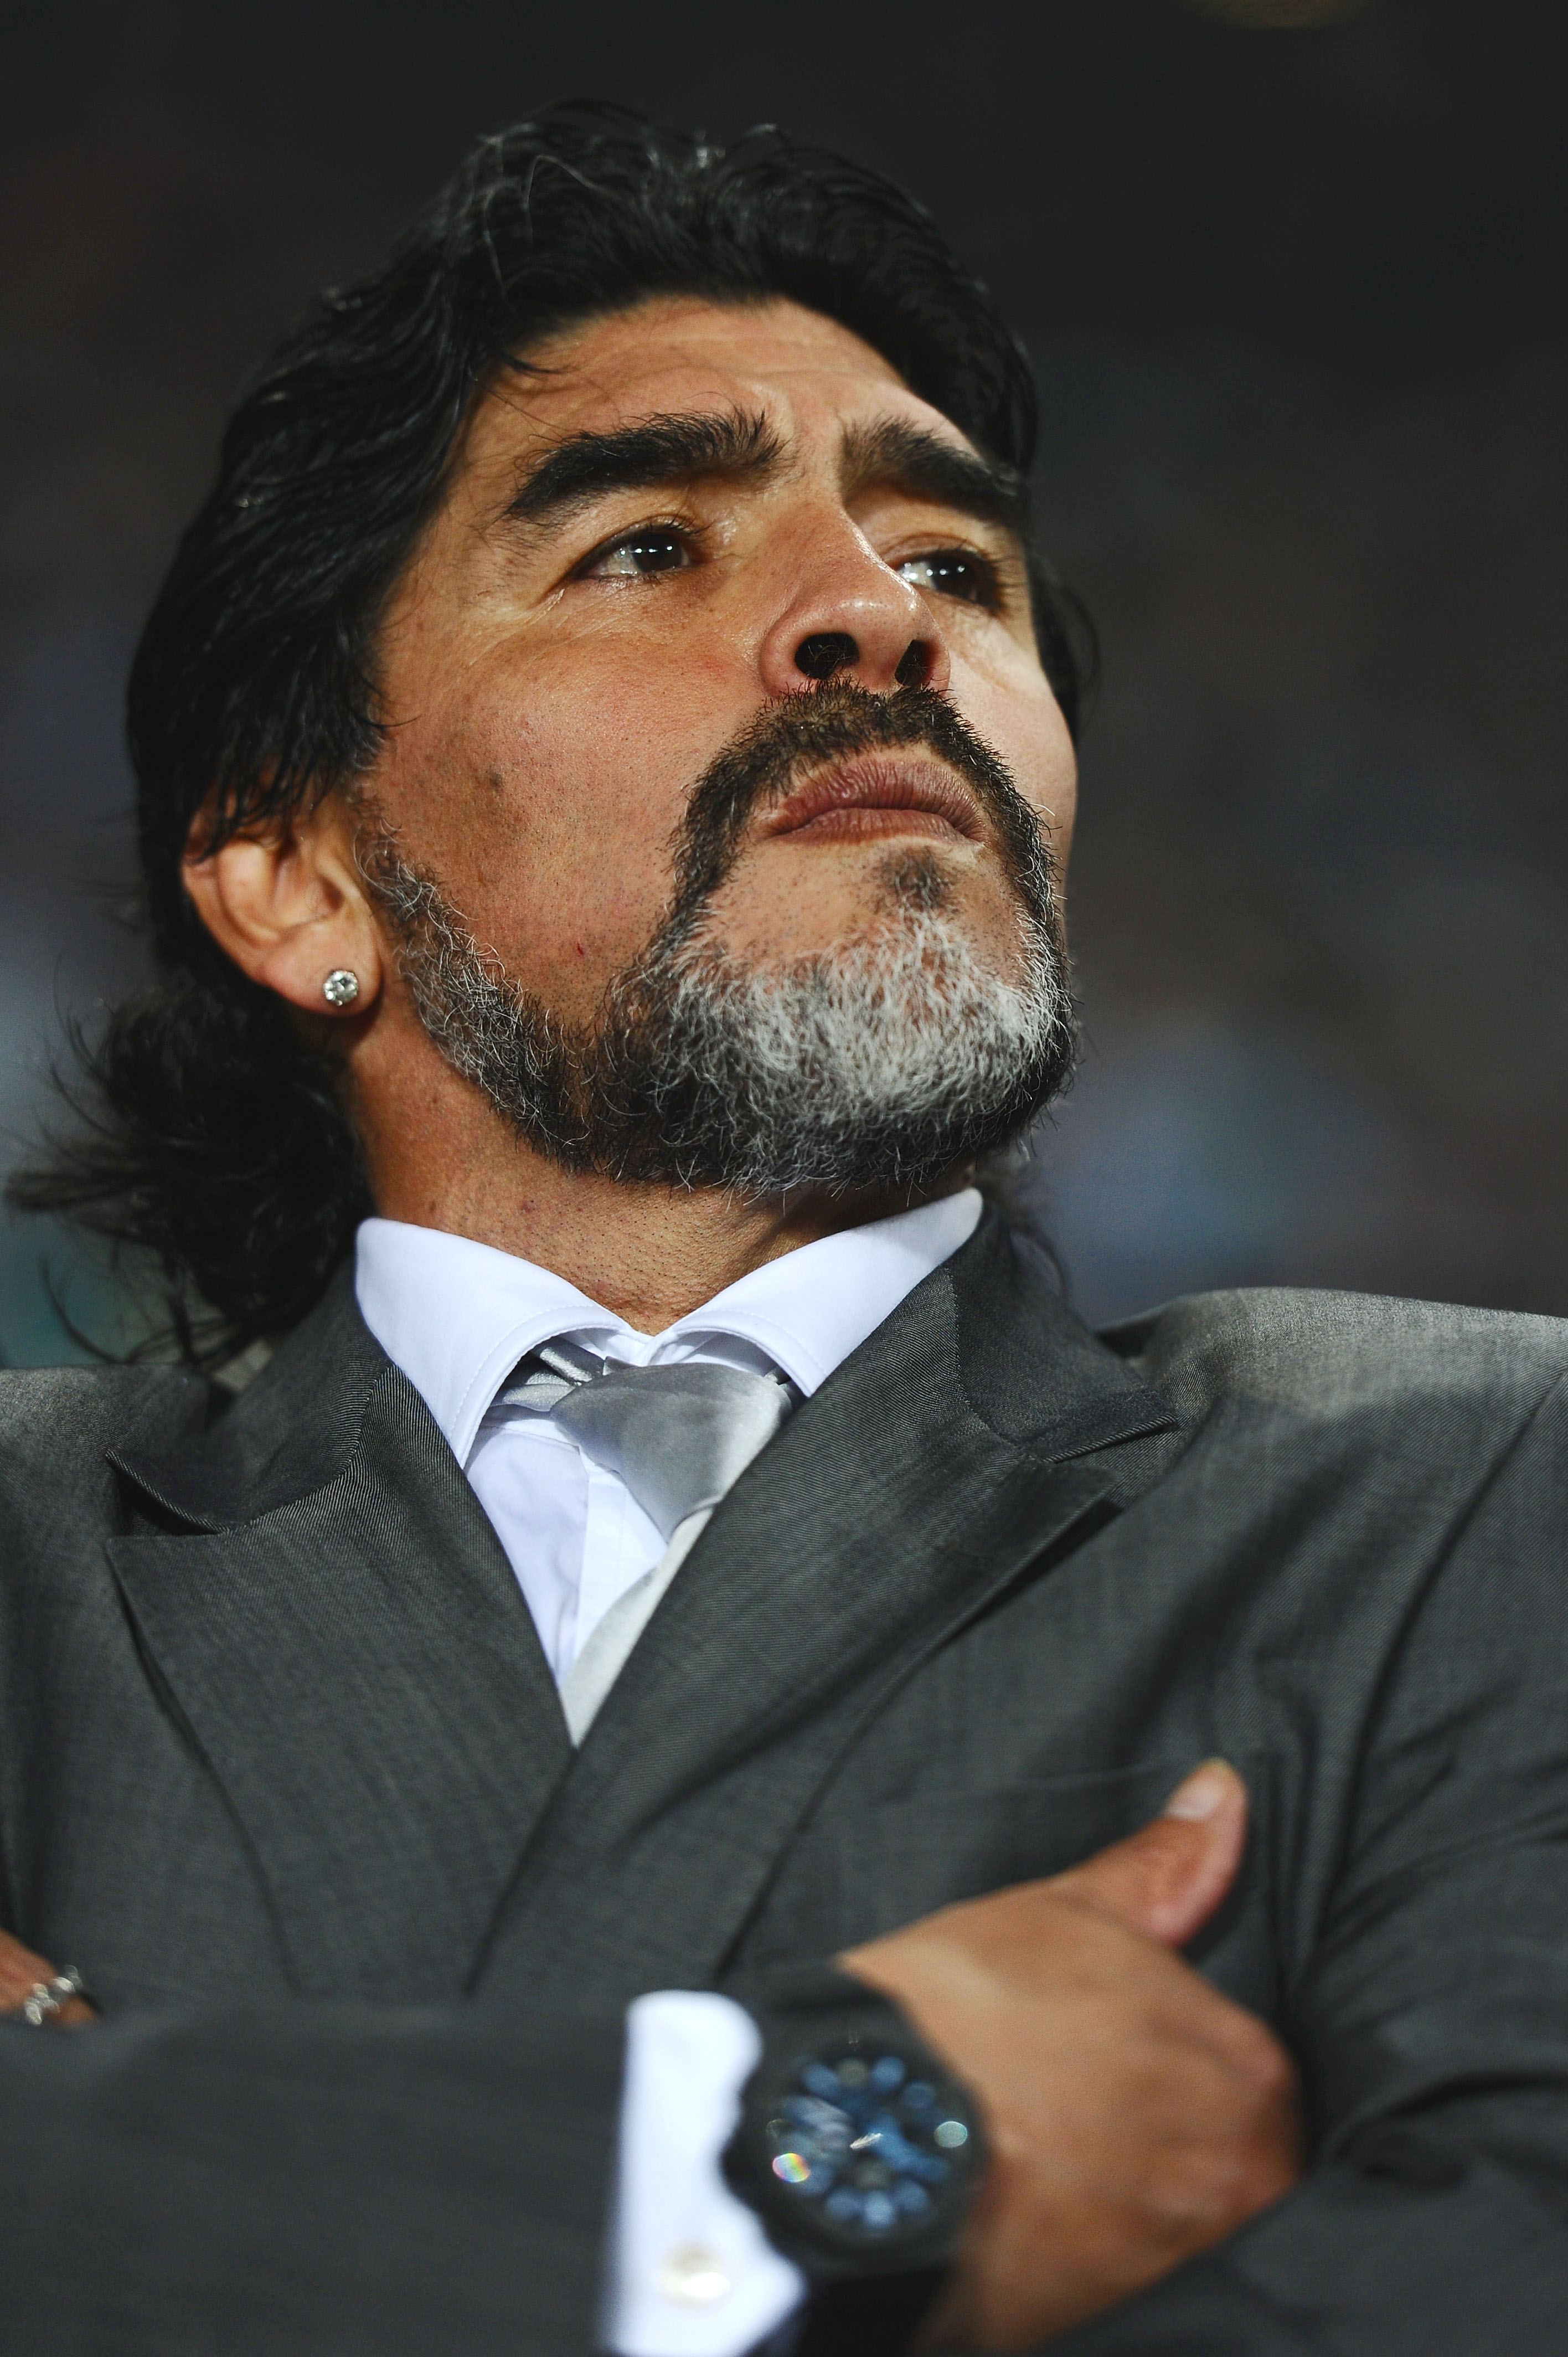 JOHANNESBURG, SOUTH AFRICA - JUNE 27:  Diego Maradona head coach of Argentina looks thoughtful ahead of the 2010 FIFA World Cup South Africa Round of Sixteen match between Argentina and Mexico at Soccer City Stadium on June 27, 2010 in Johannesburg, South